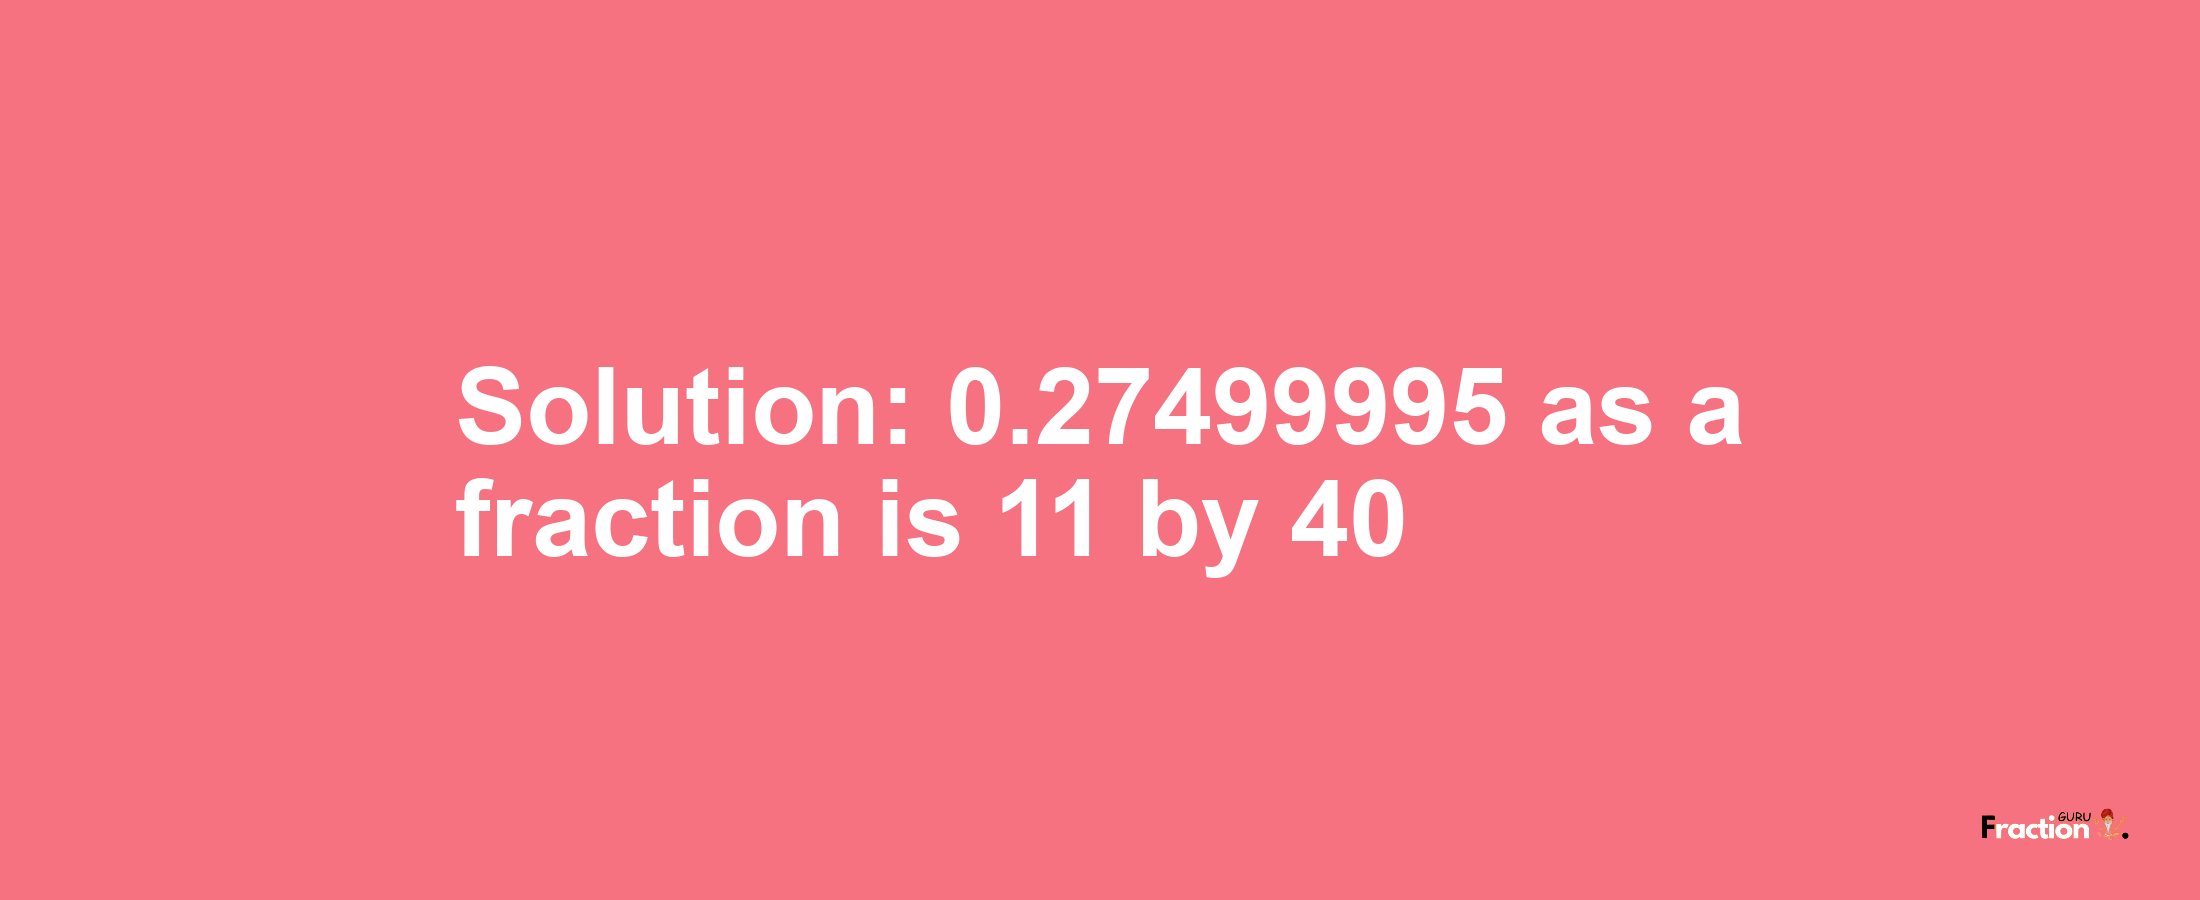 Solution:0.27499995 as a fraction is 11/40